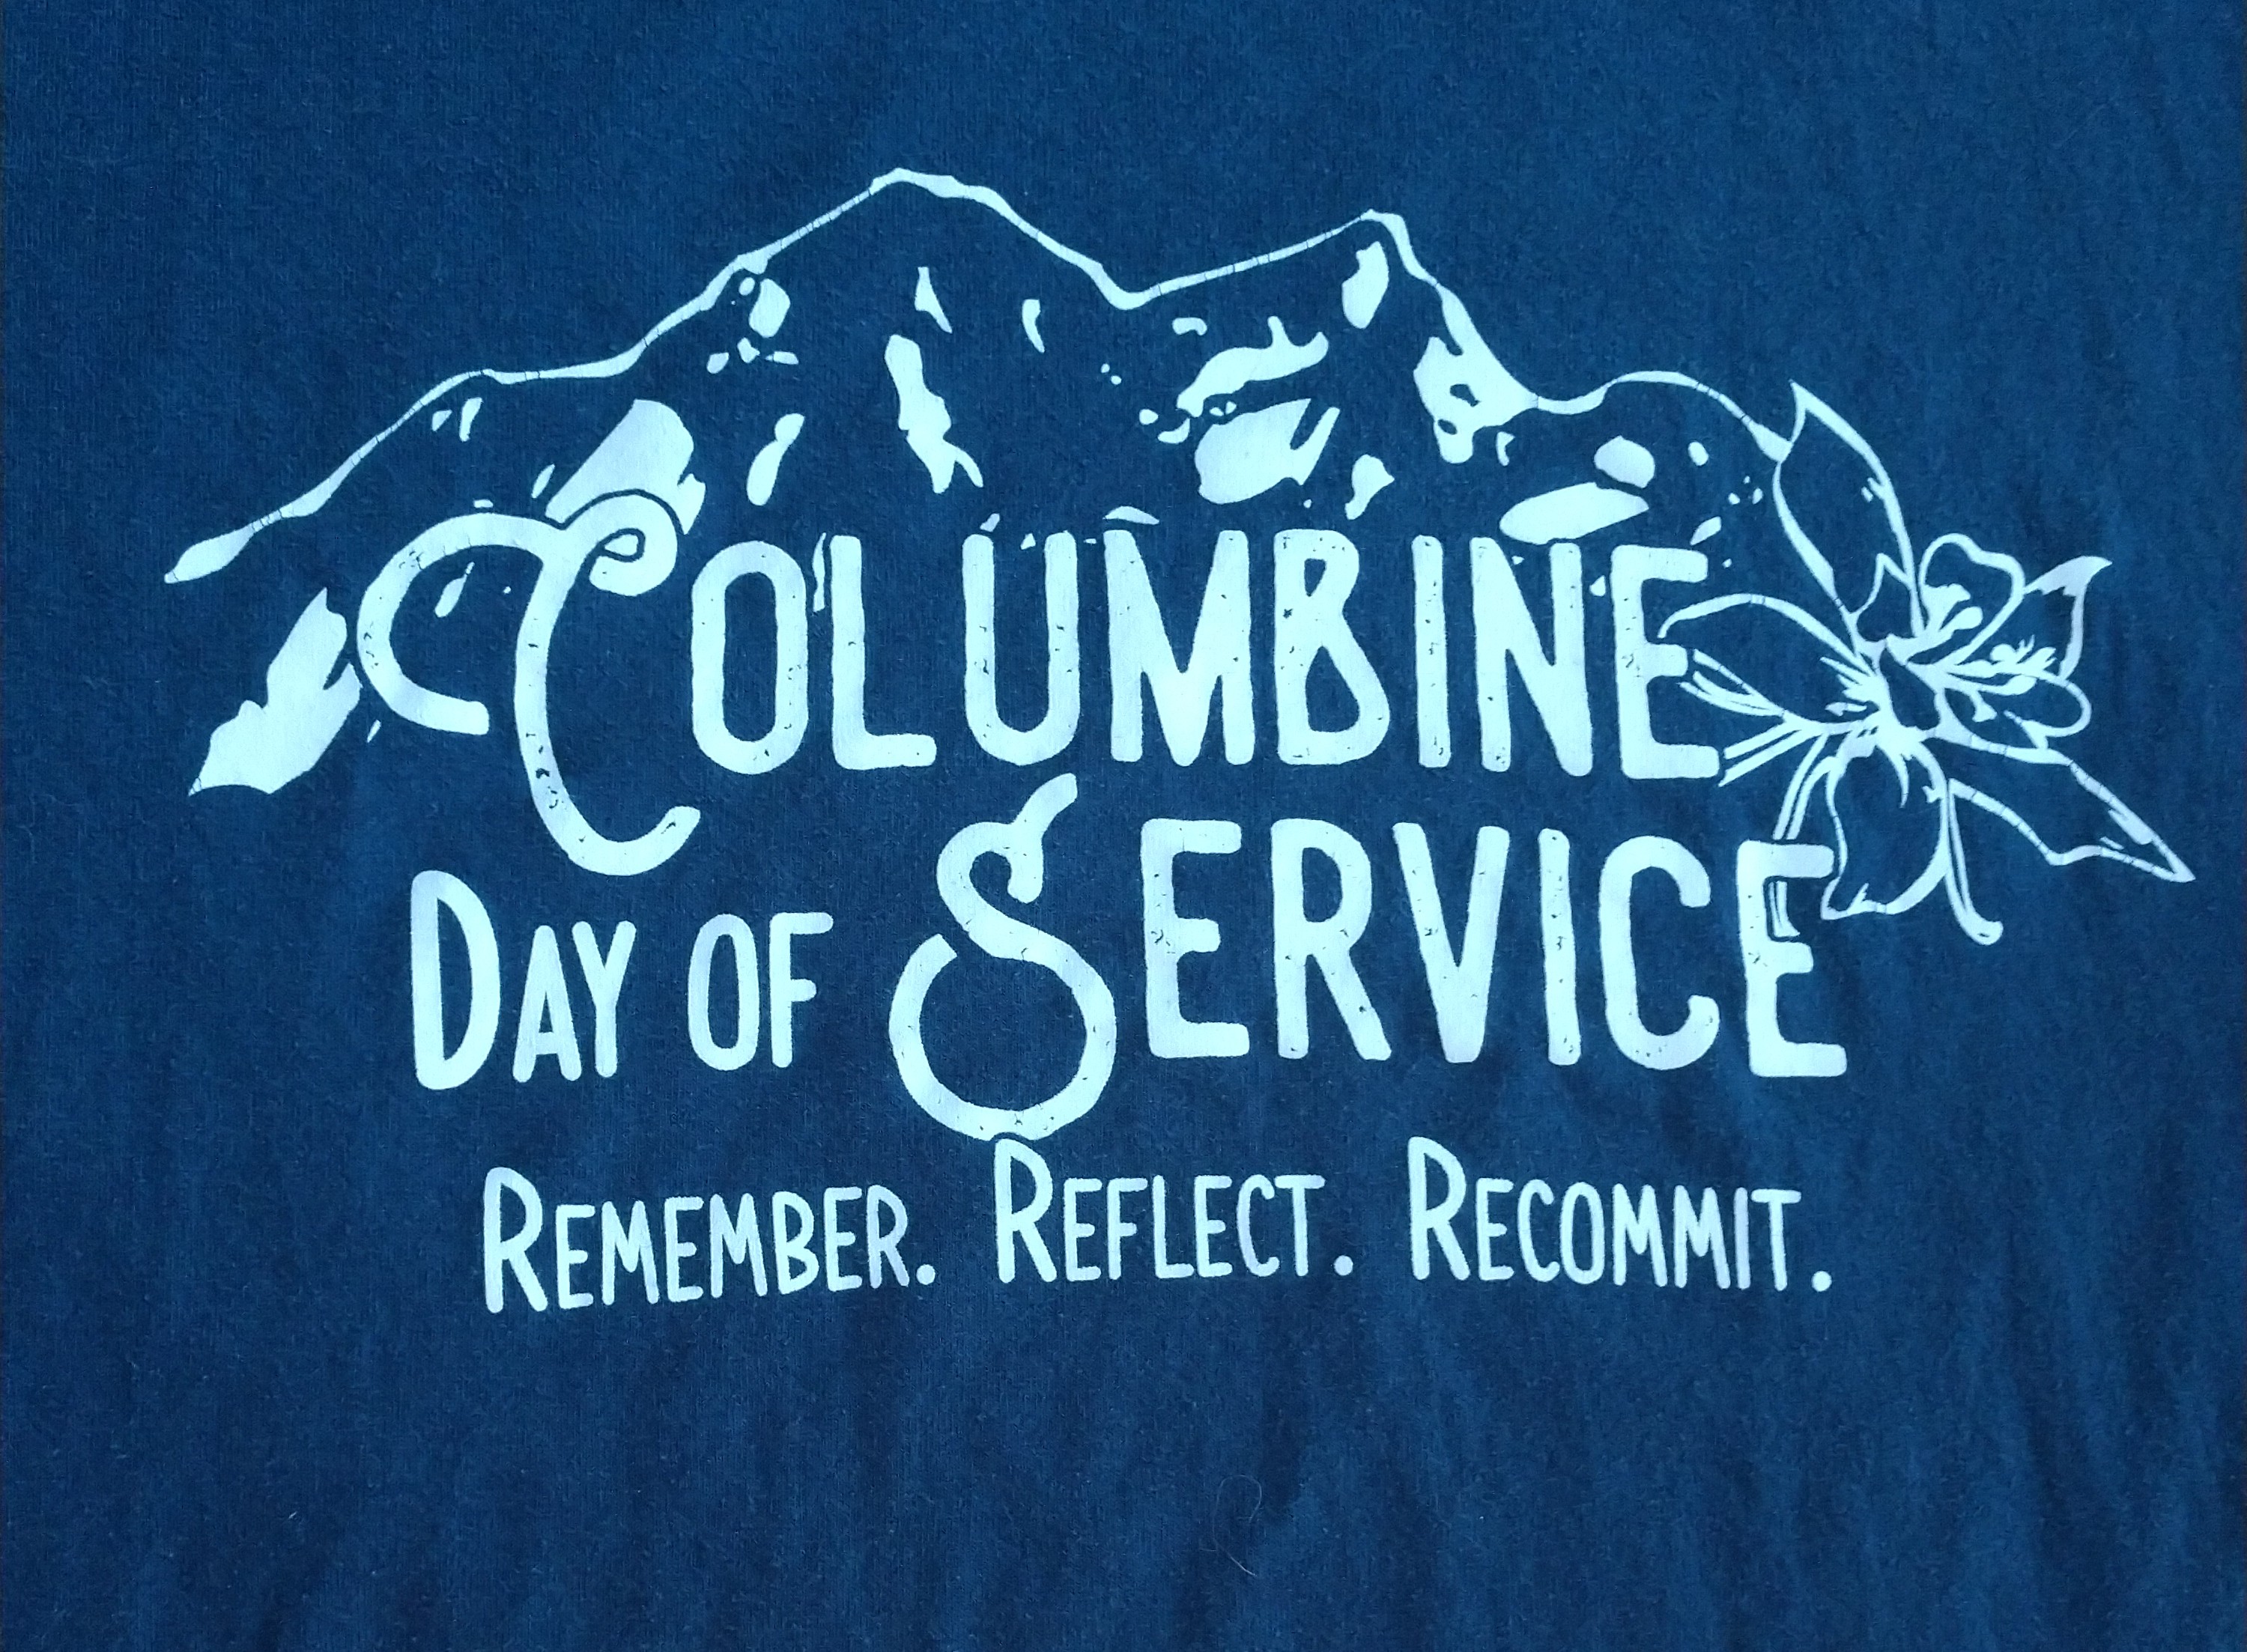 The 2019 Columbine Day of Service logo design, including the motto “Remember. Reflect. Recommit.”